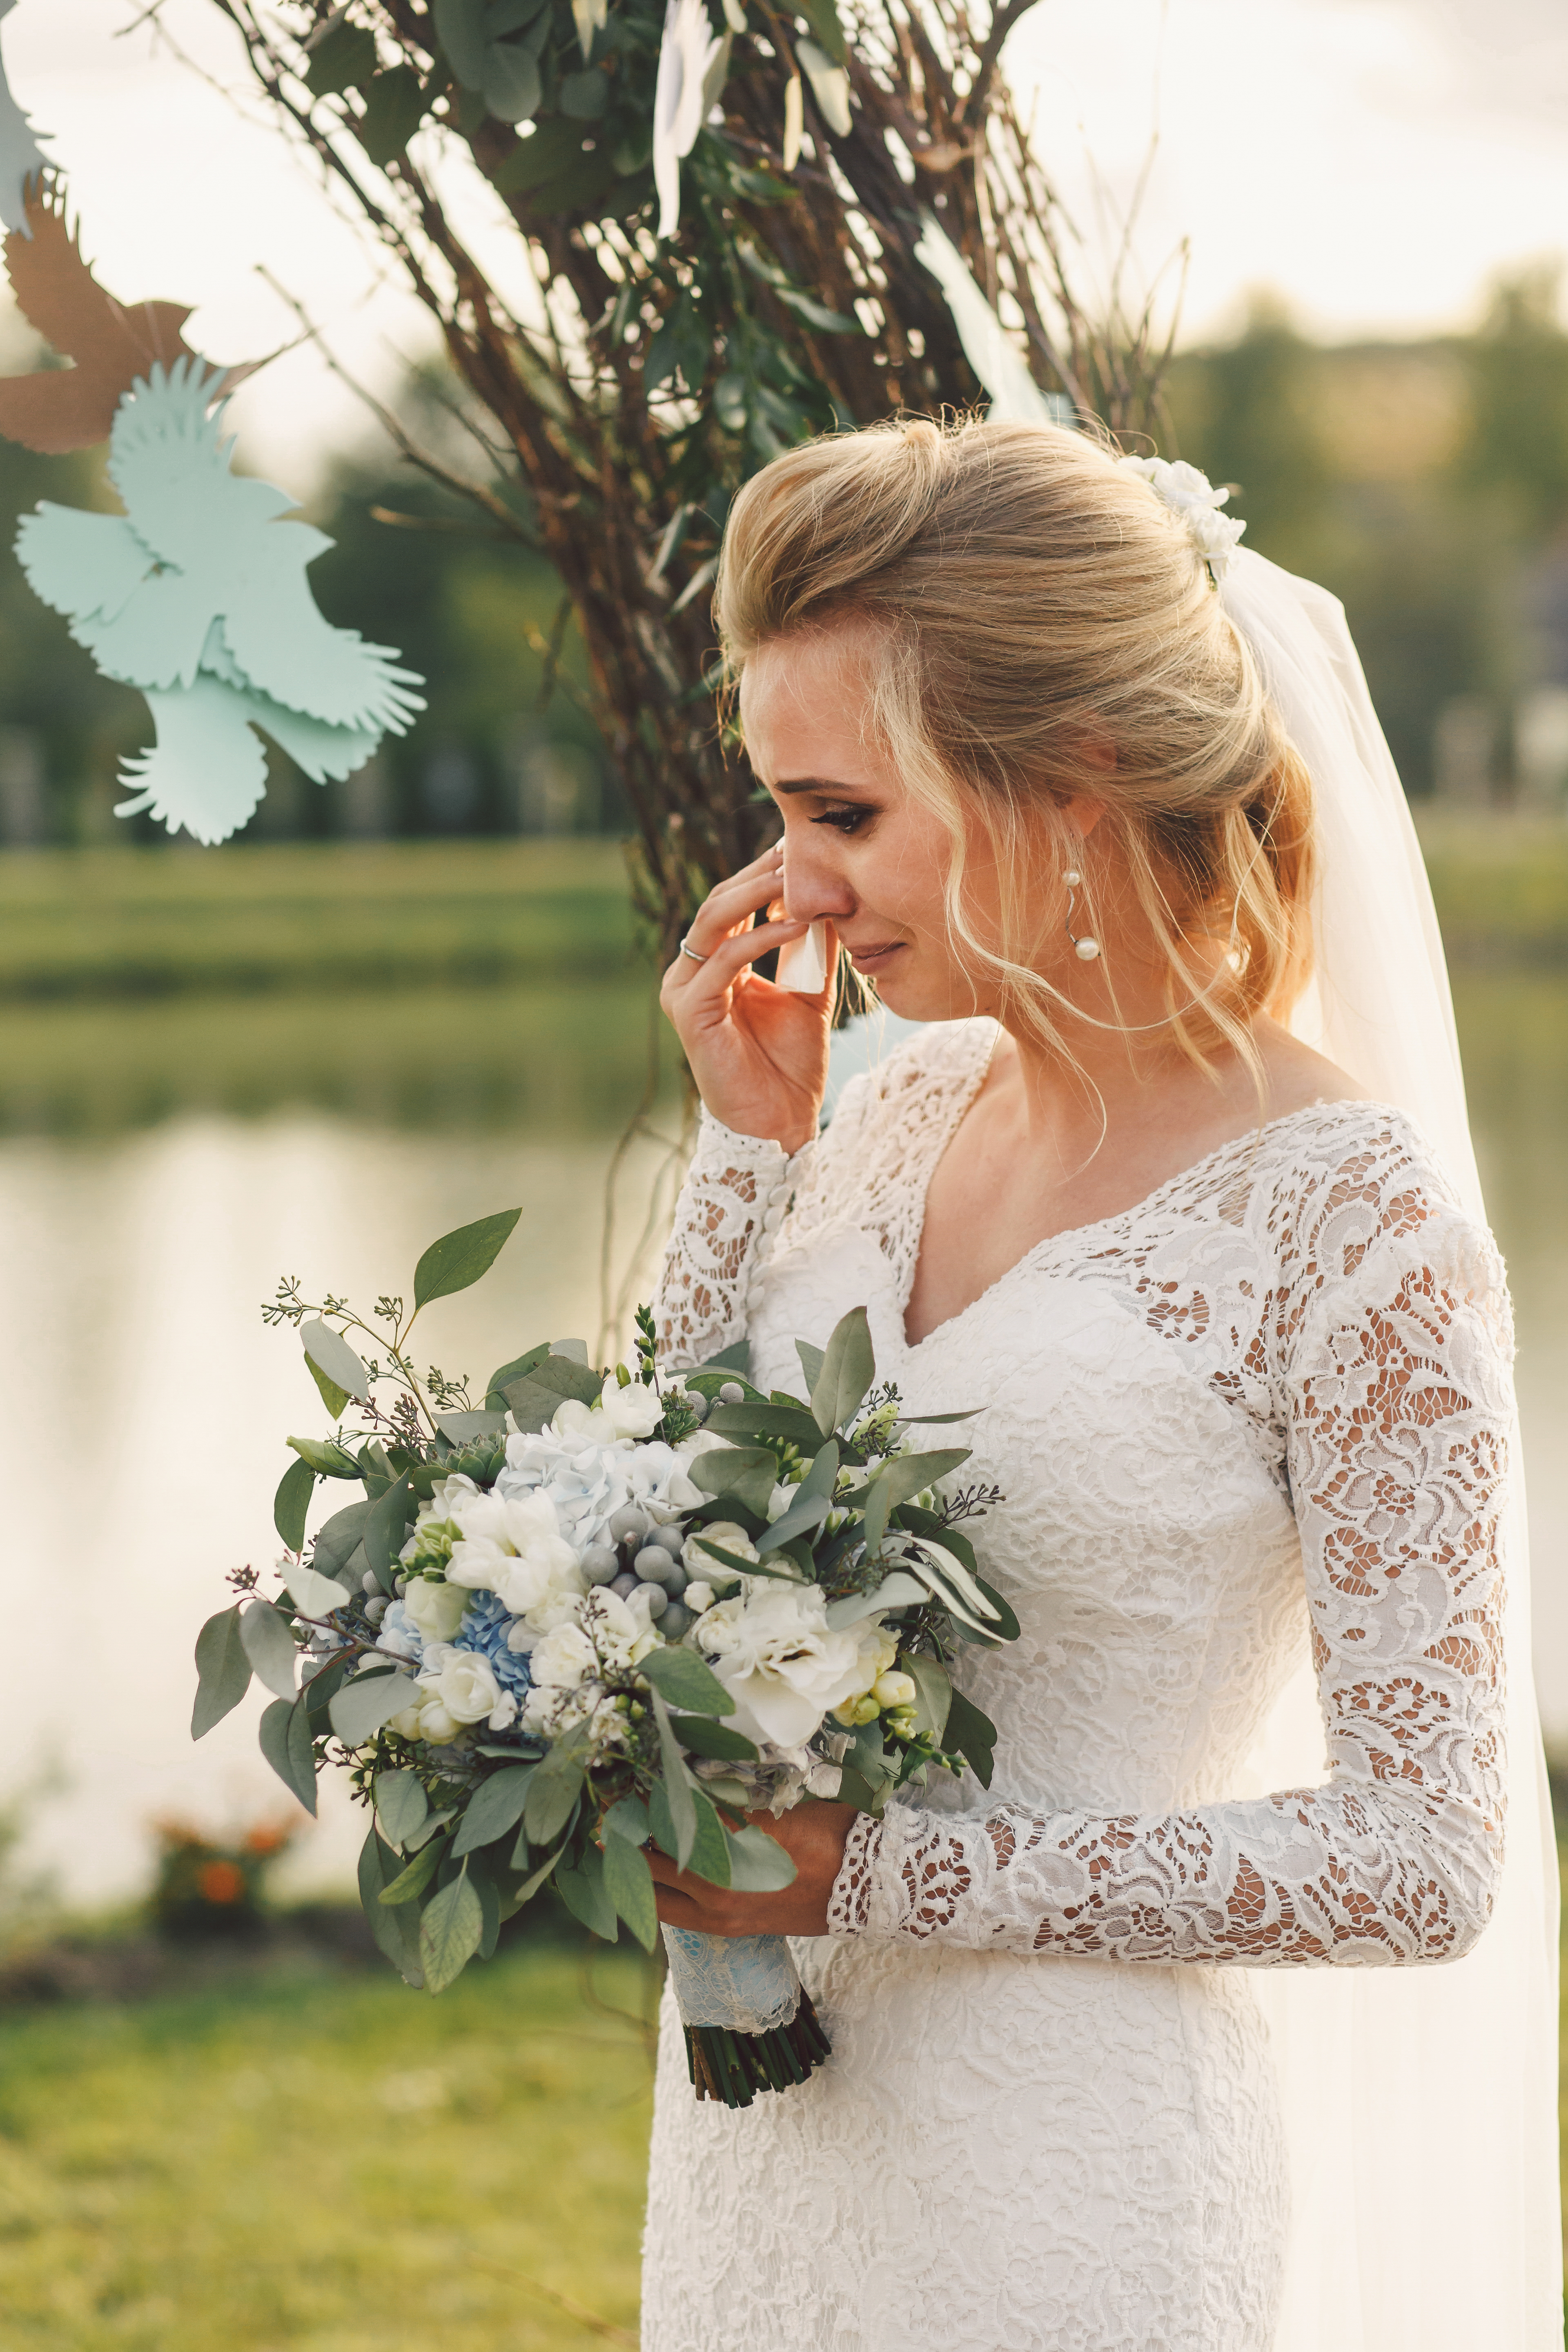 A bride crying while standing outdoors | Source: Shutterstock